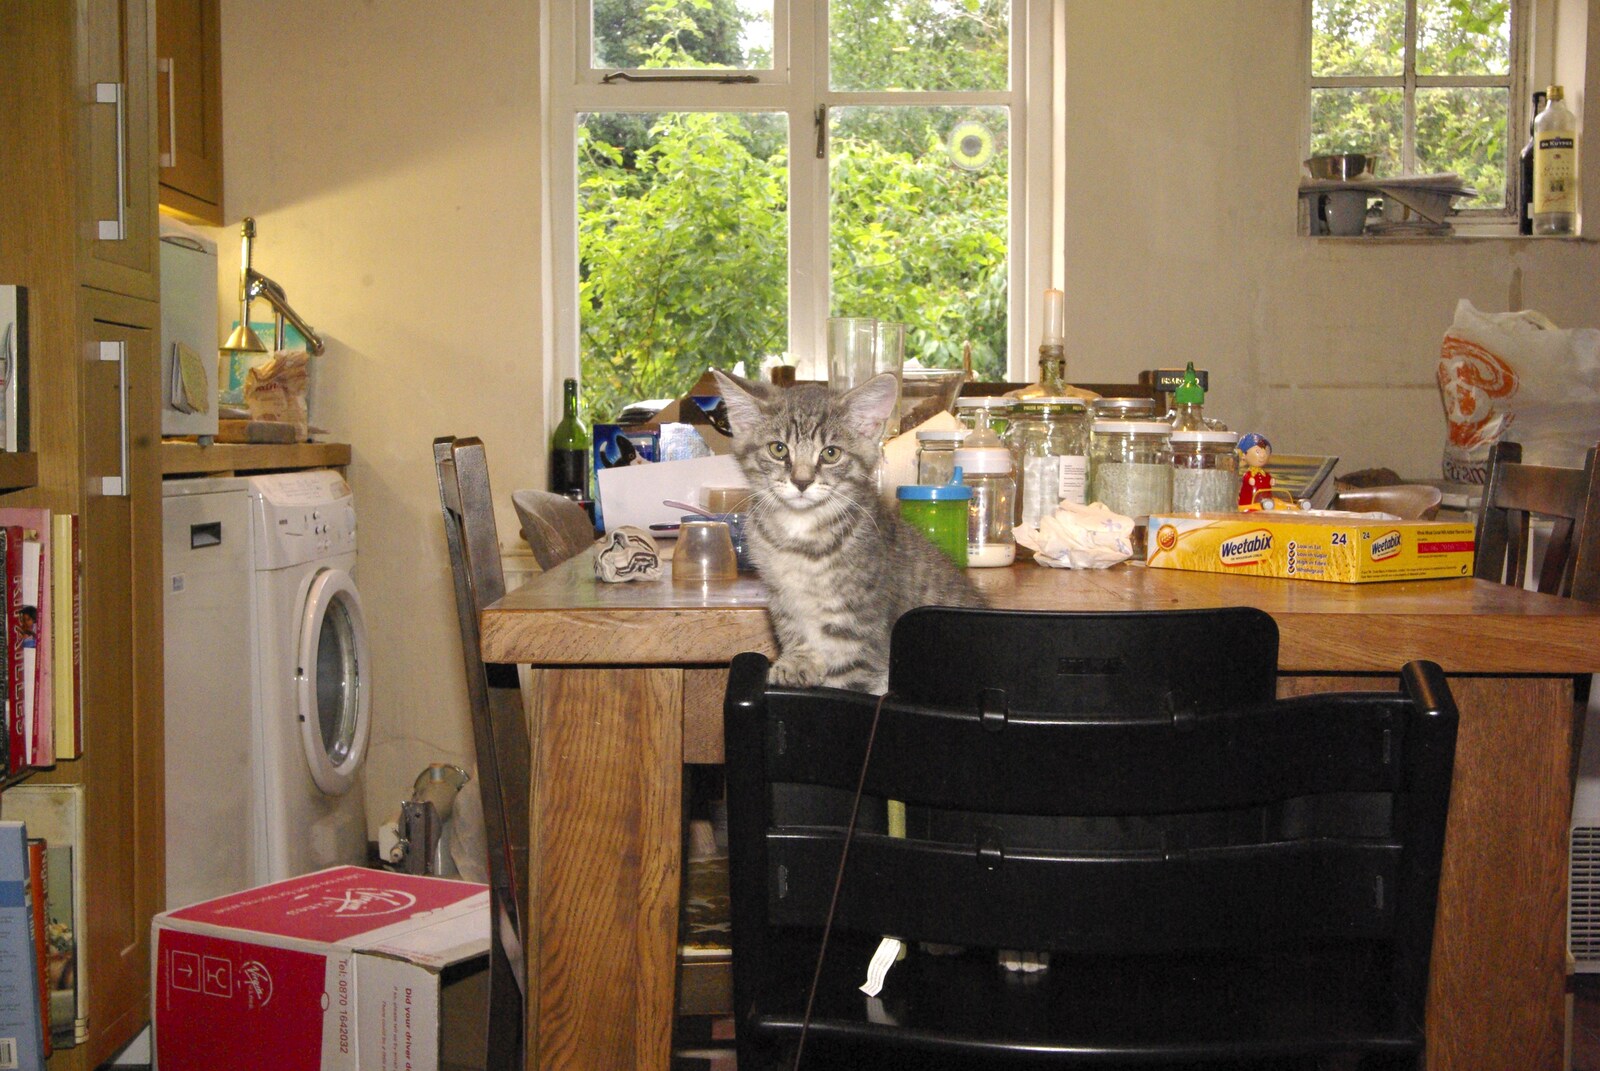 Boris perches on Fred's chair from New Kittens and Moonlit Fields, Brome, Suffolk - 11th August 2009